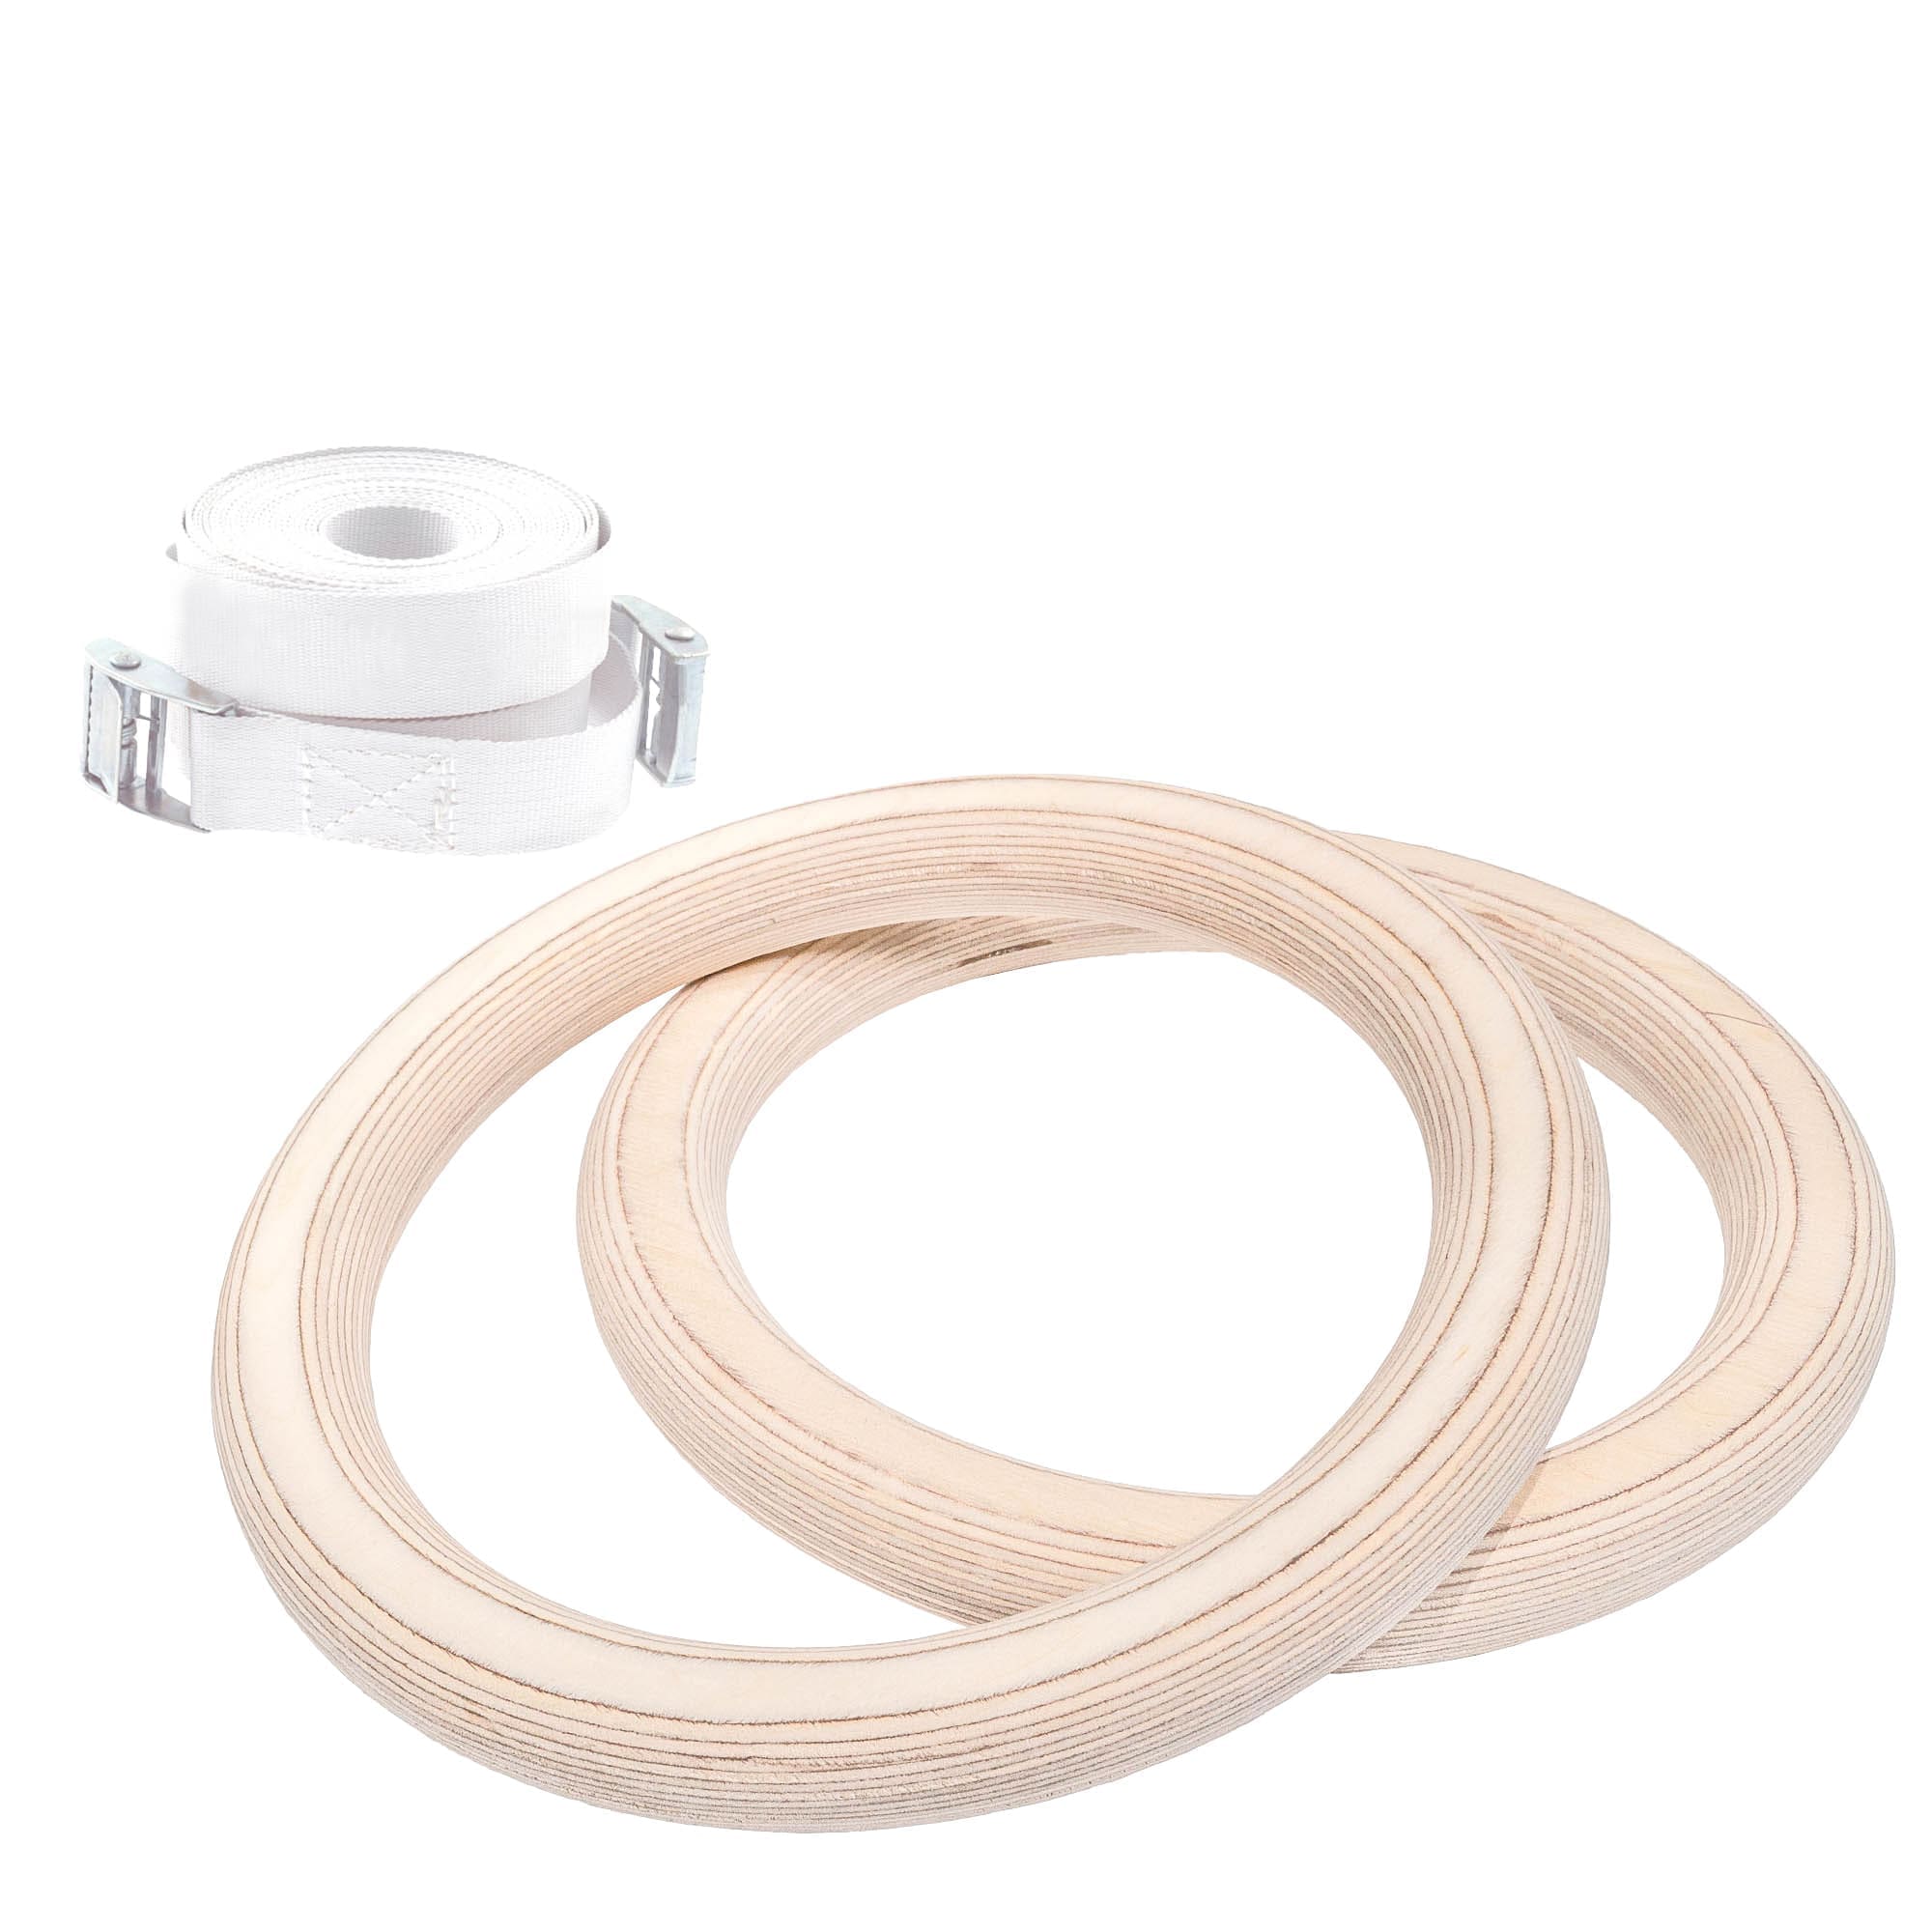 Birch colored ULPU gym rings with white straps without label